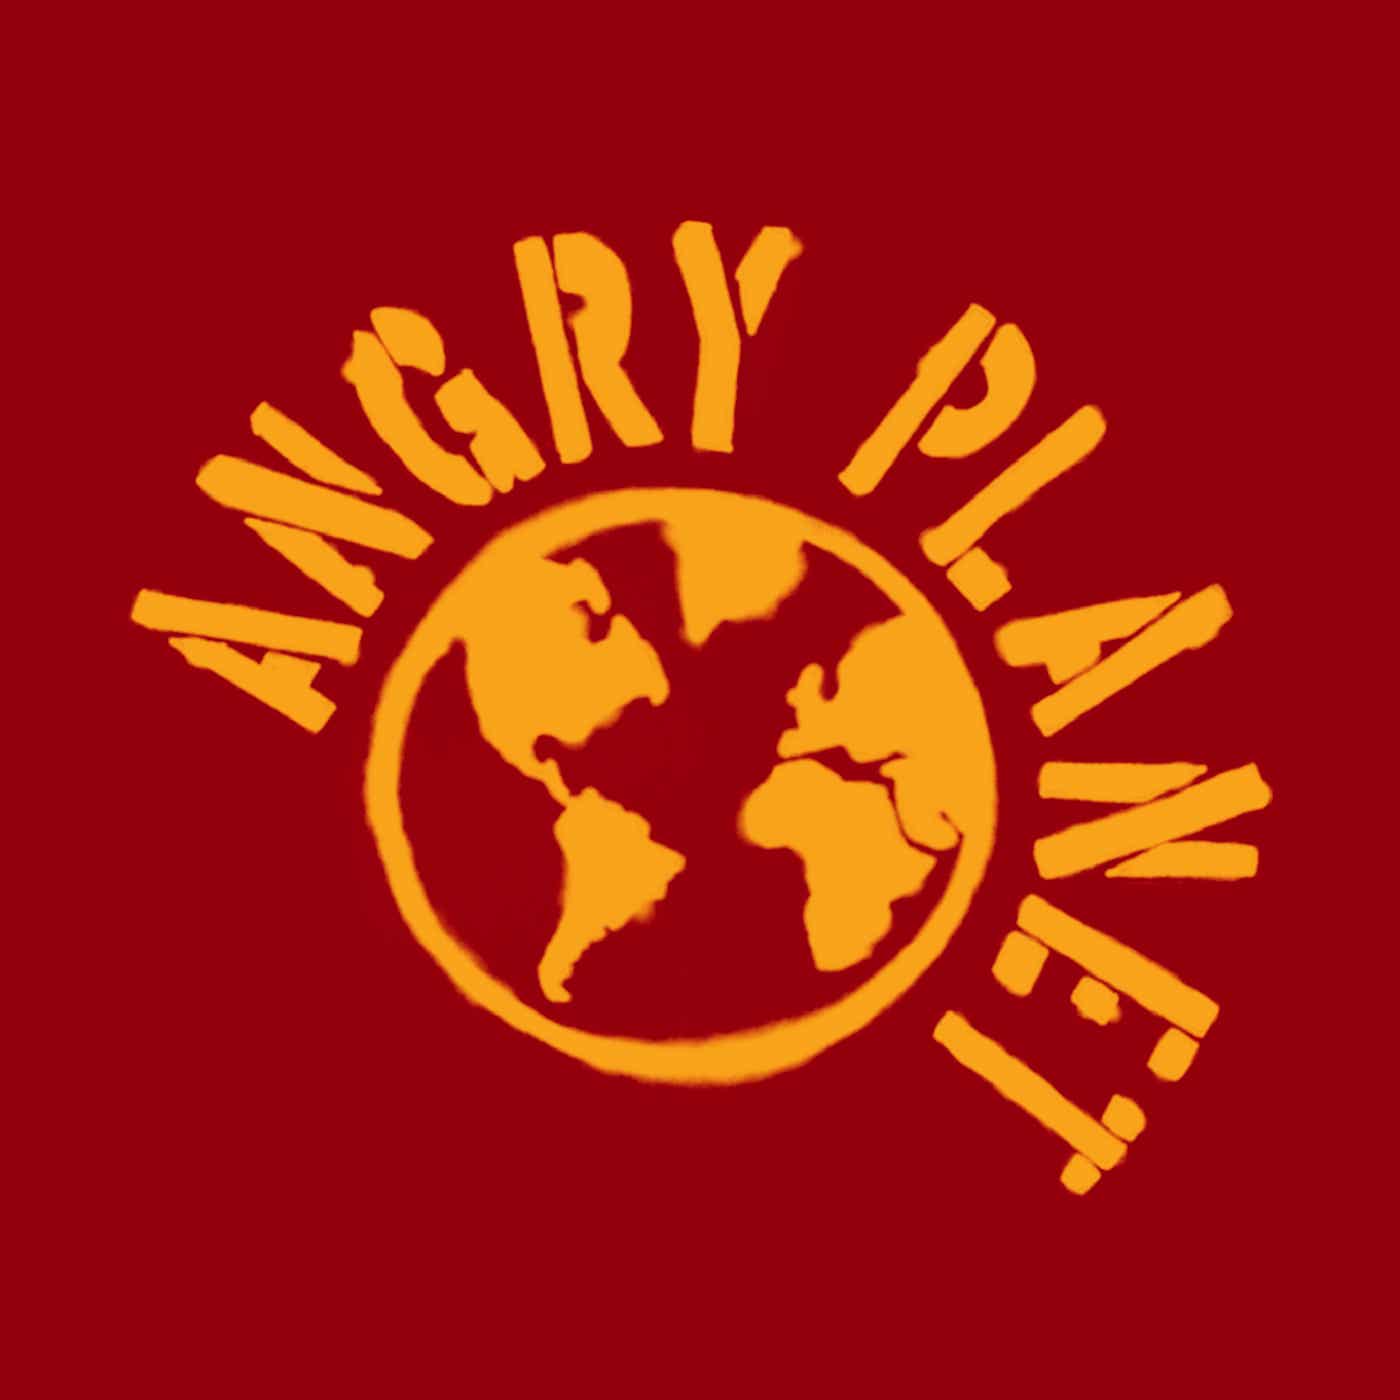 Angry Planet Subscriber Feed (private feed for grossbryan0@gmail.com)